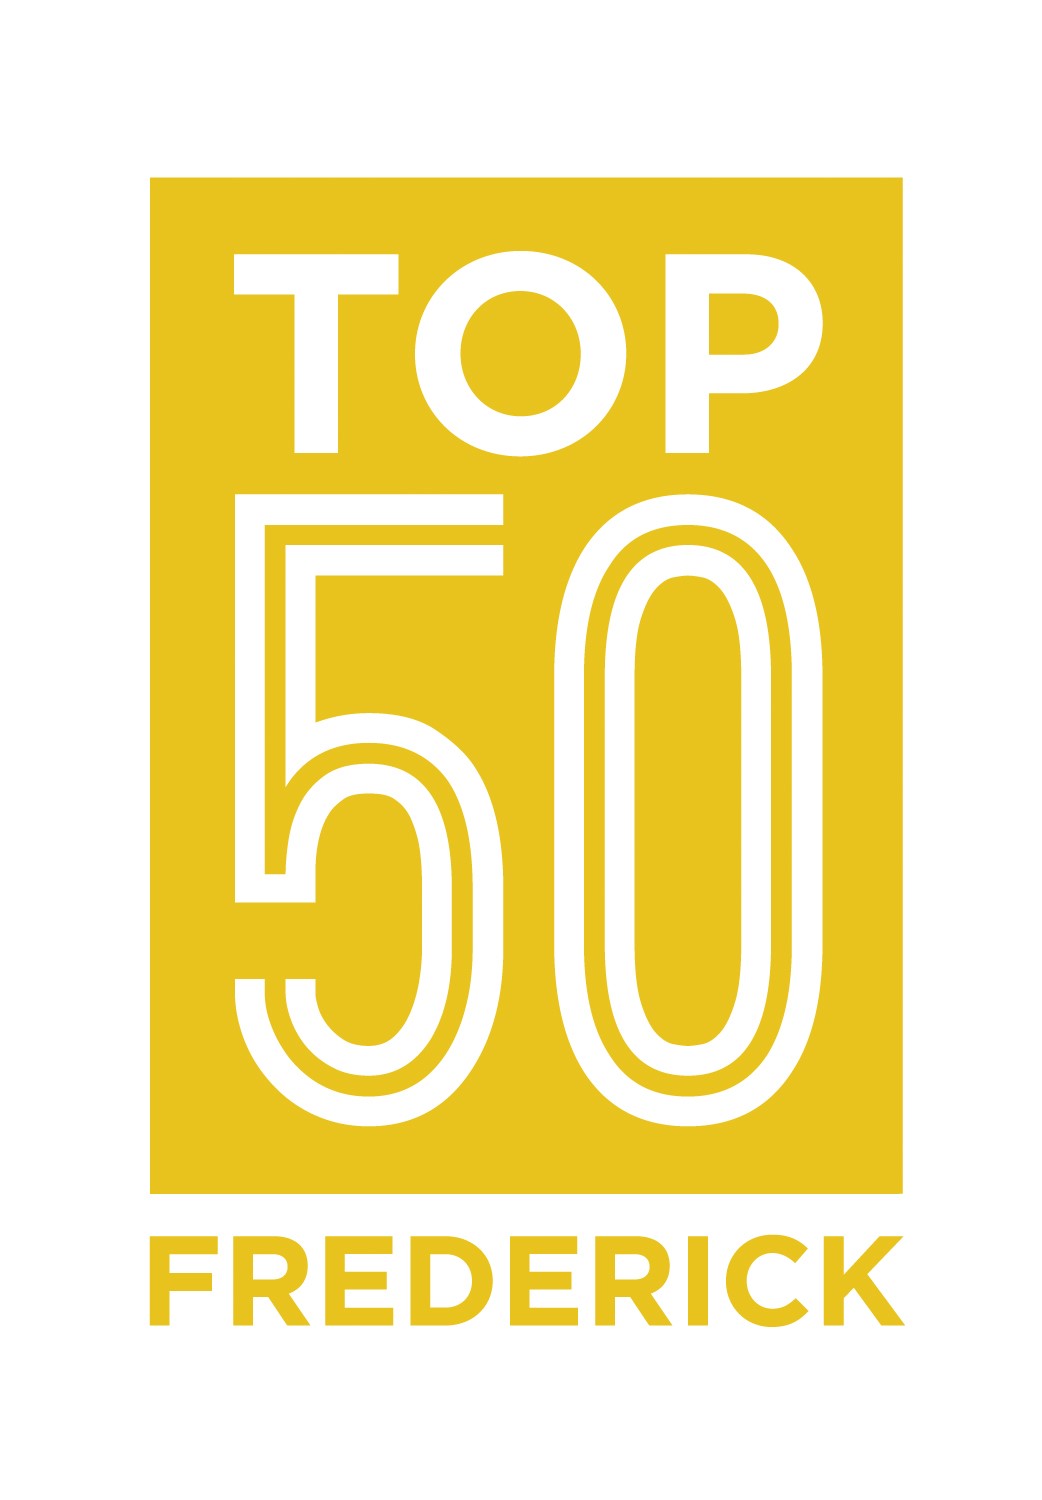 Frederick’s Top 50 EmPOWERED Leaders